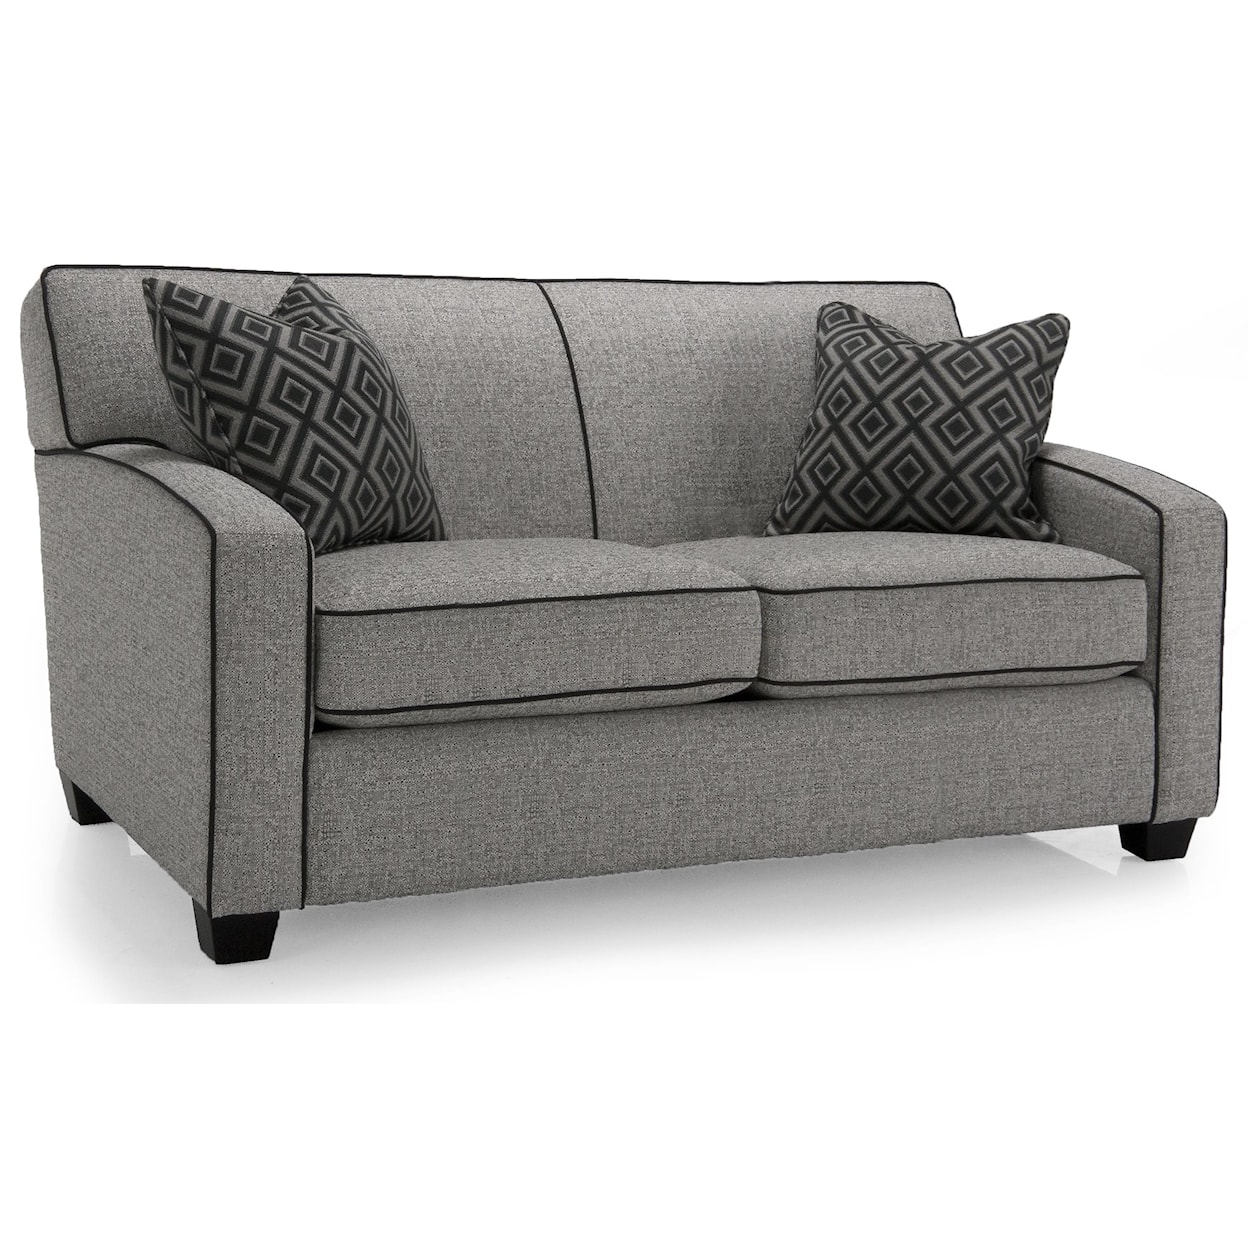 Taelor Designs Nita Double Sofabed